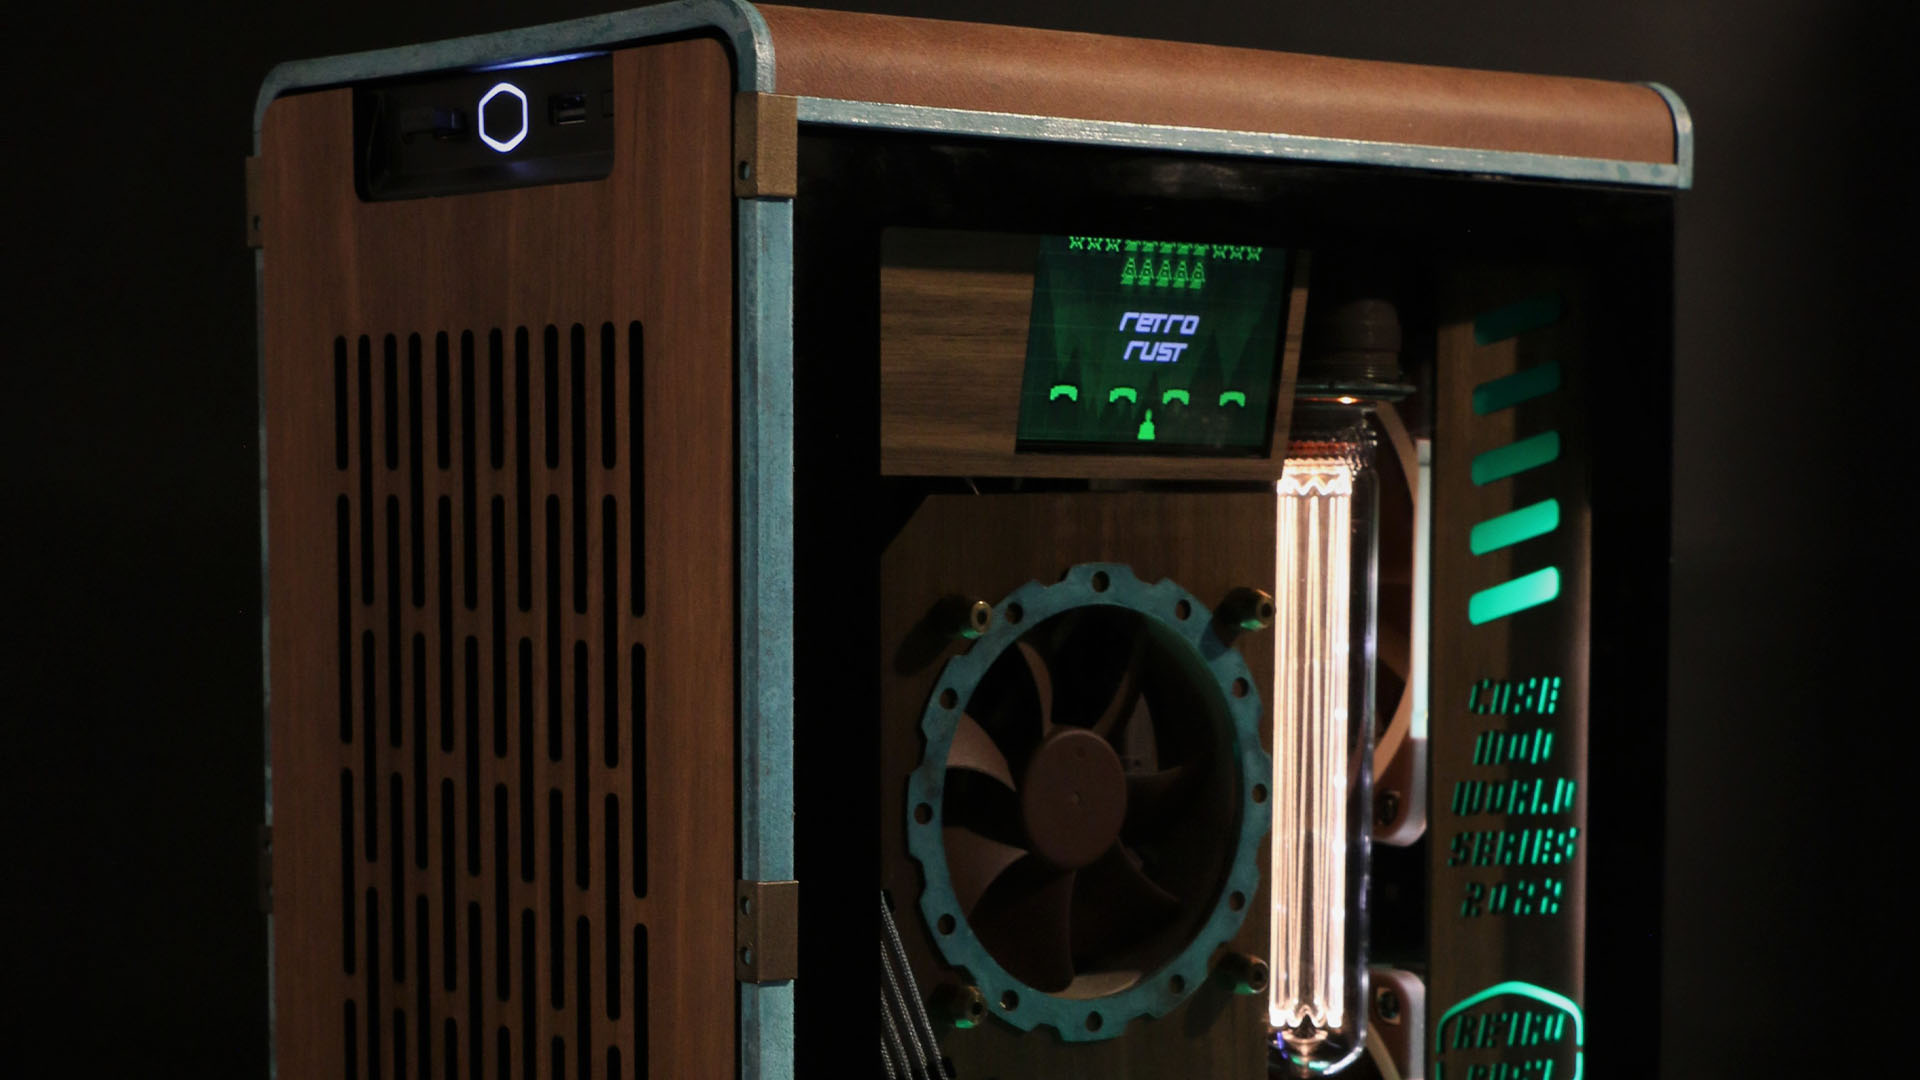 This Retro Rust mini gaming PC is stunning and we want it